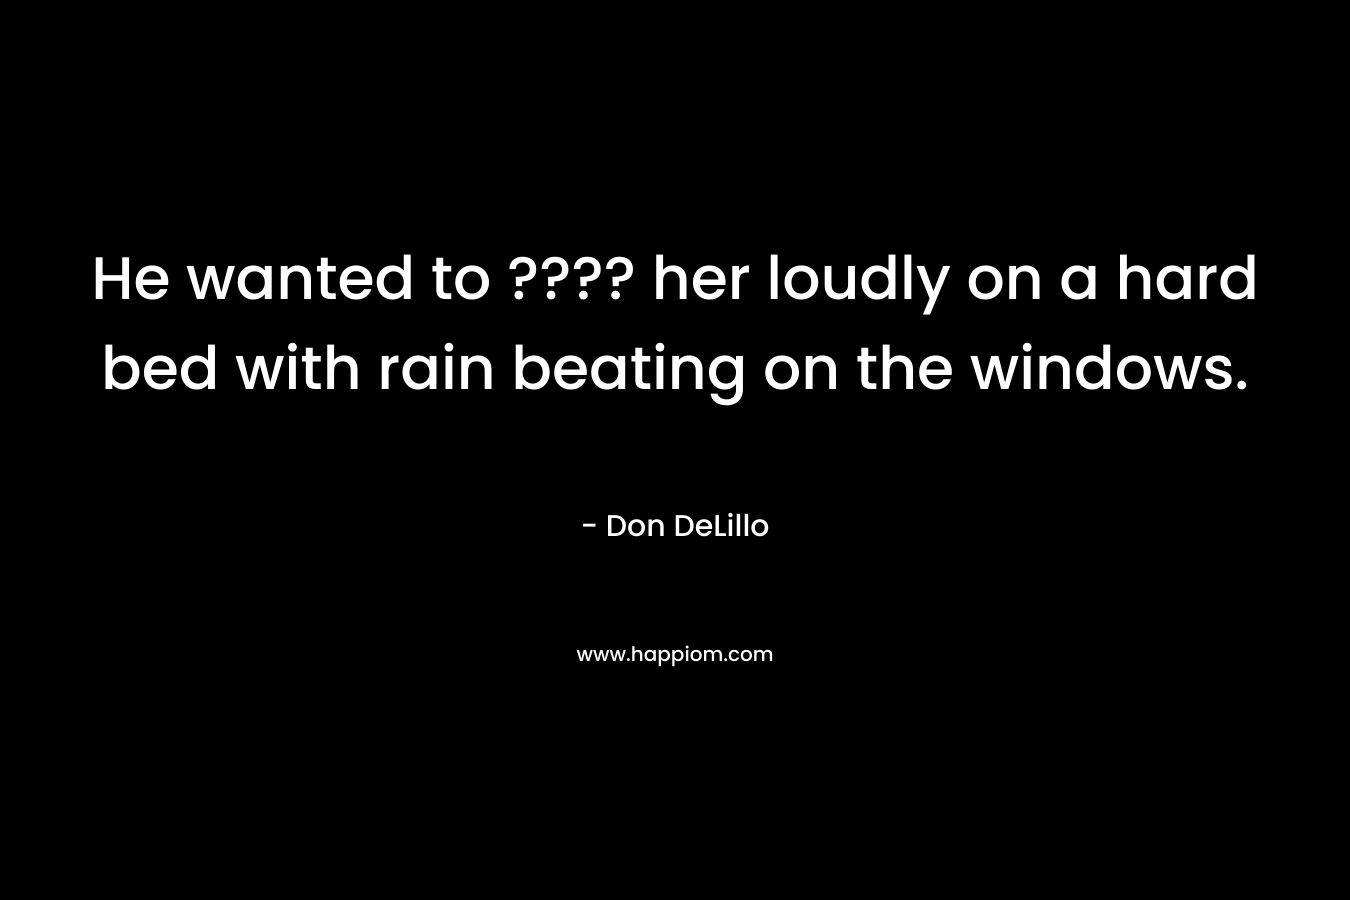 He wanted to ???? her loudly on a hard bed with rain beating on the windows. – Don DeLillo